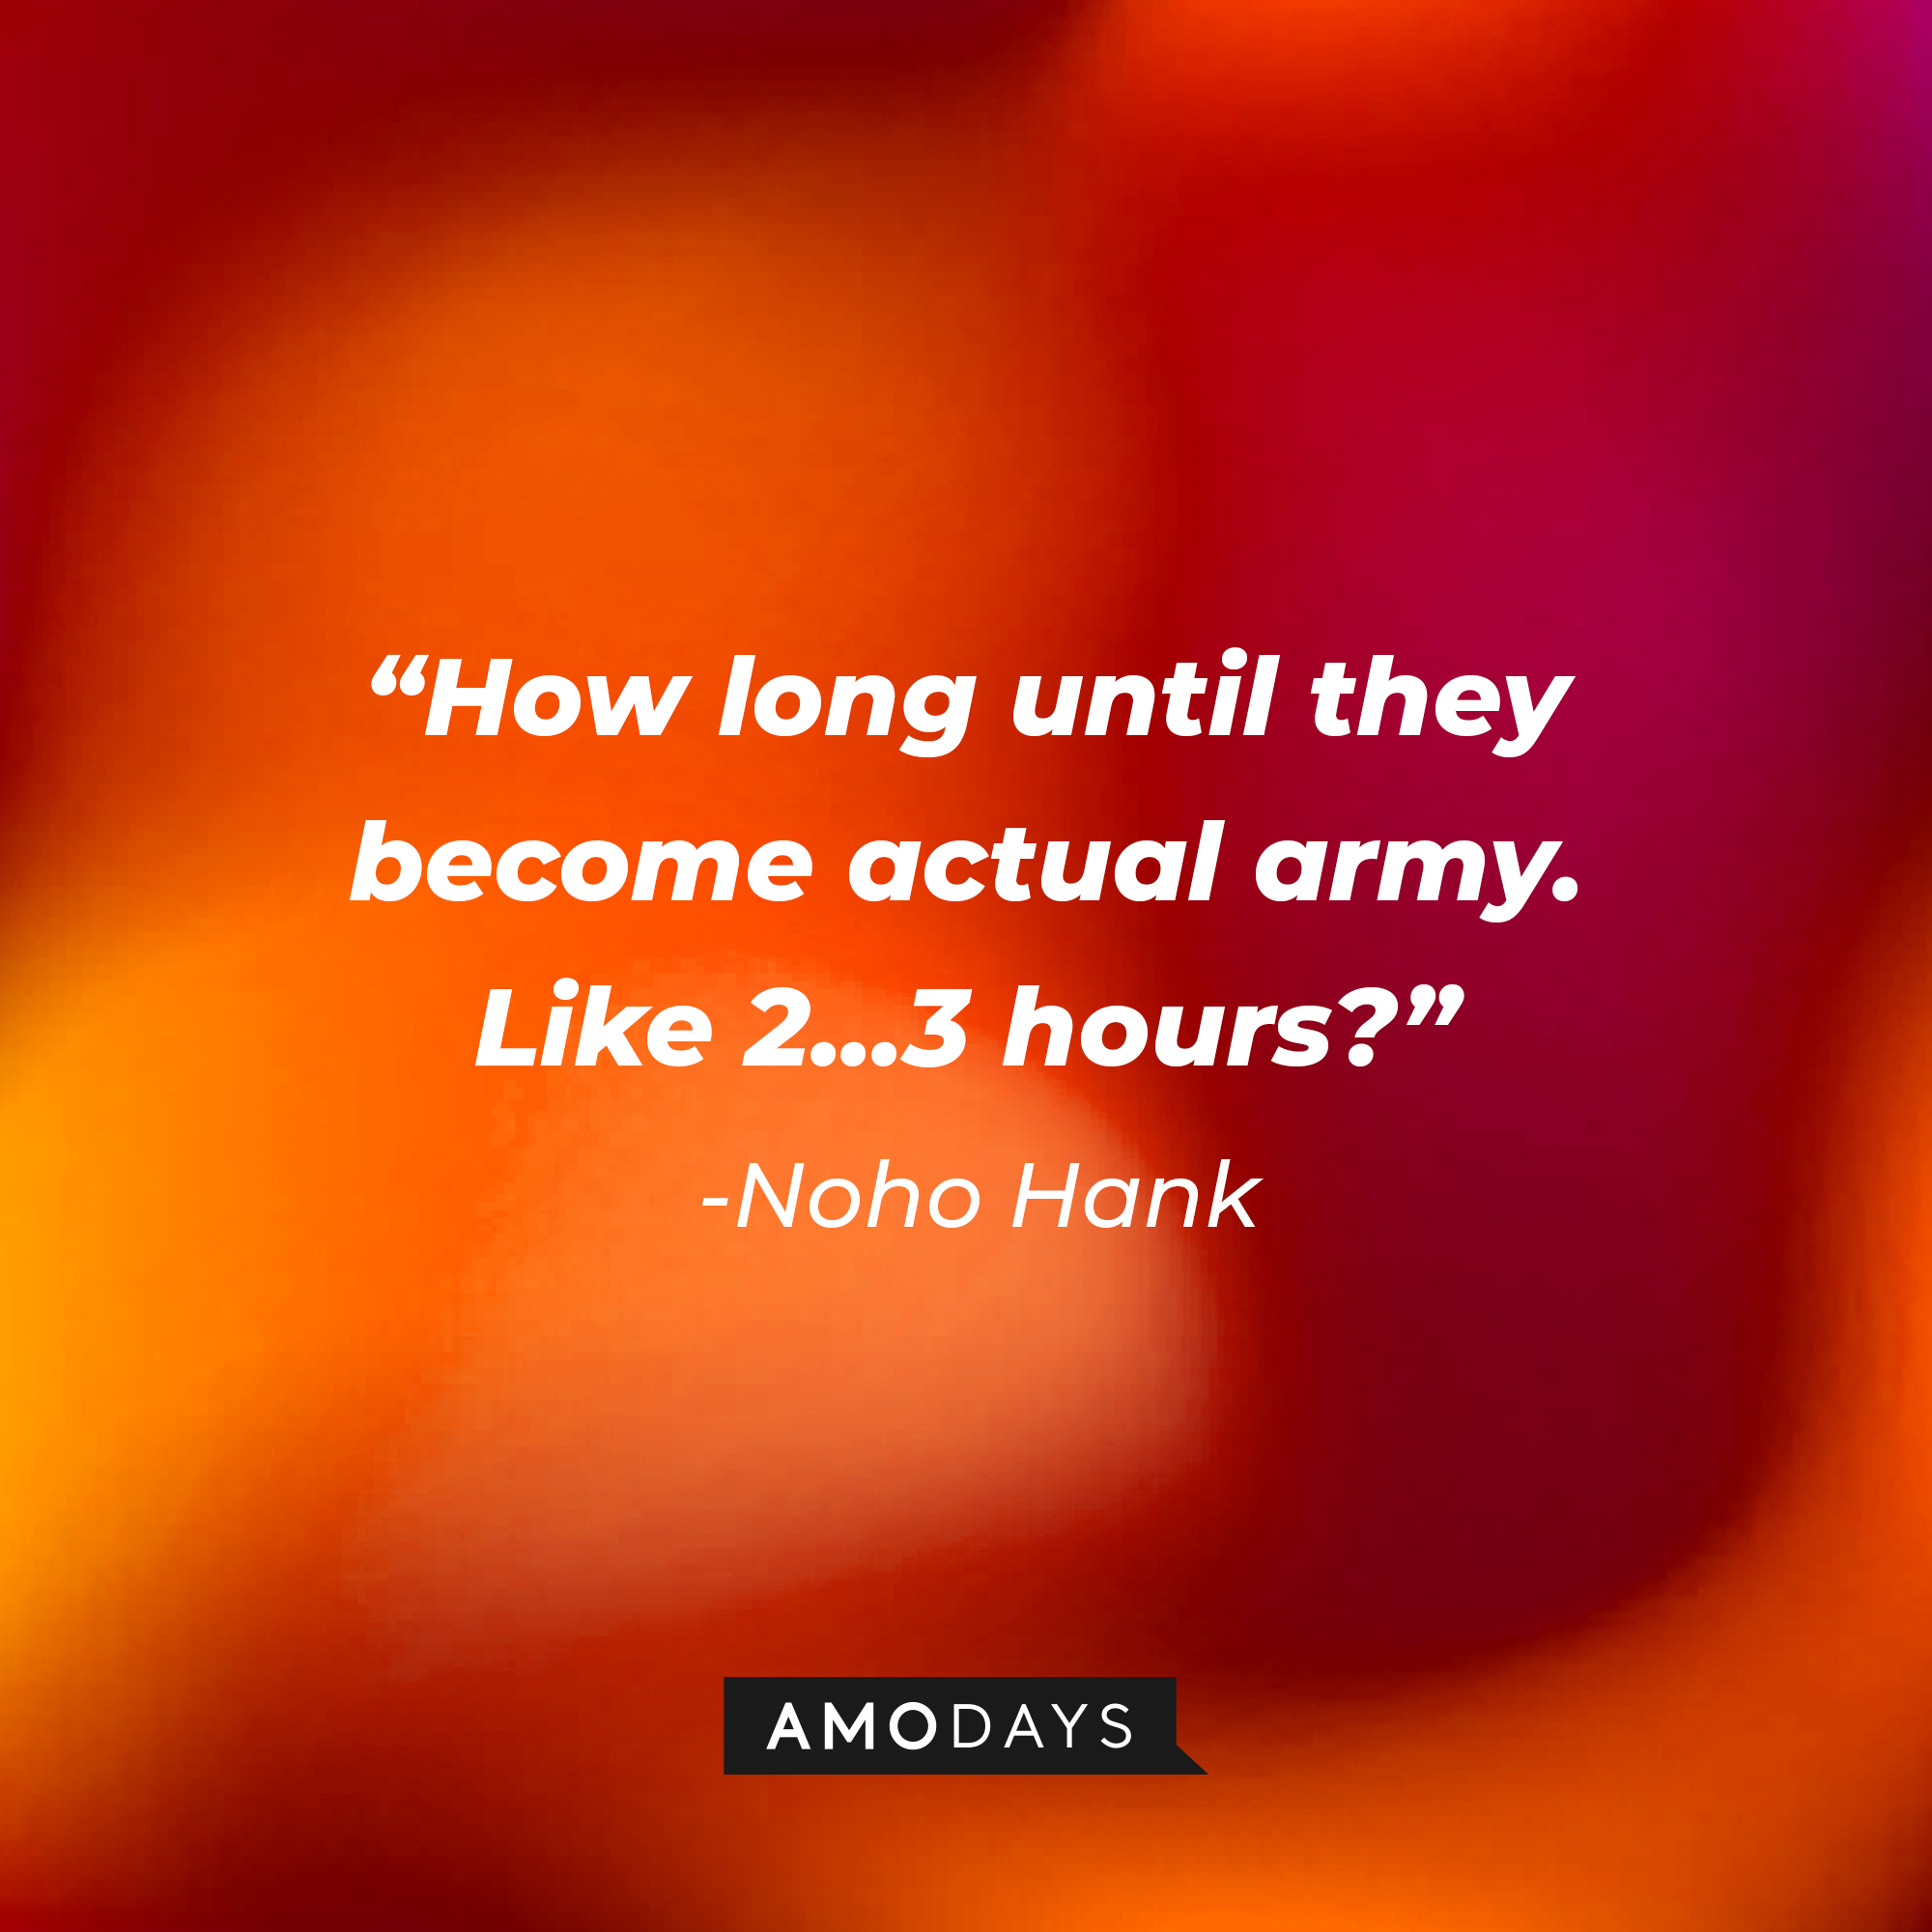 NoHo Hank, with his quote: "How long until they become actual army. Like 2...3 hours?" | Source: AmoDays